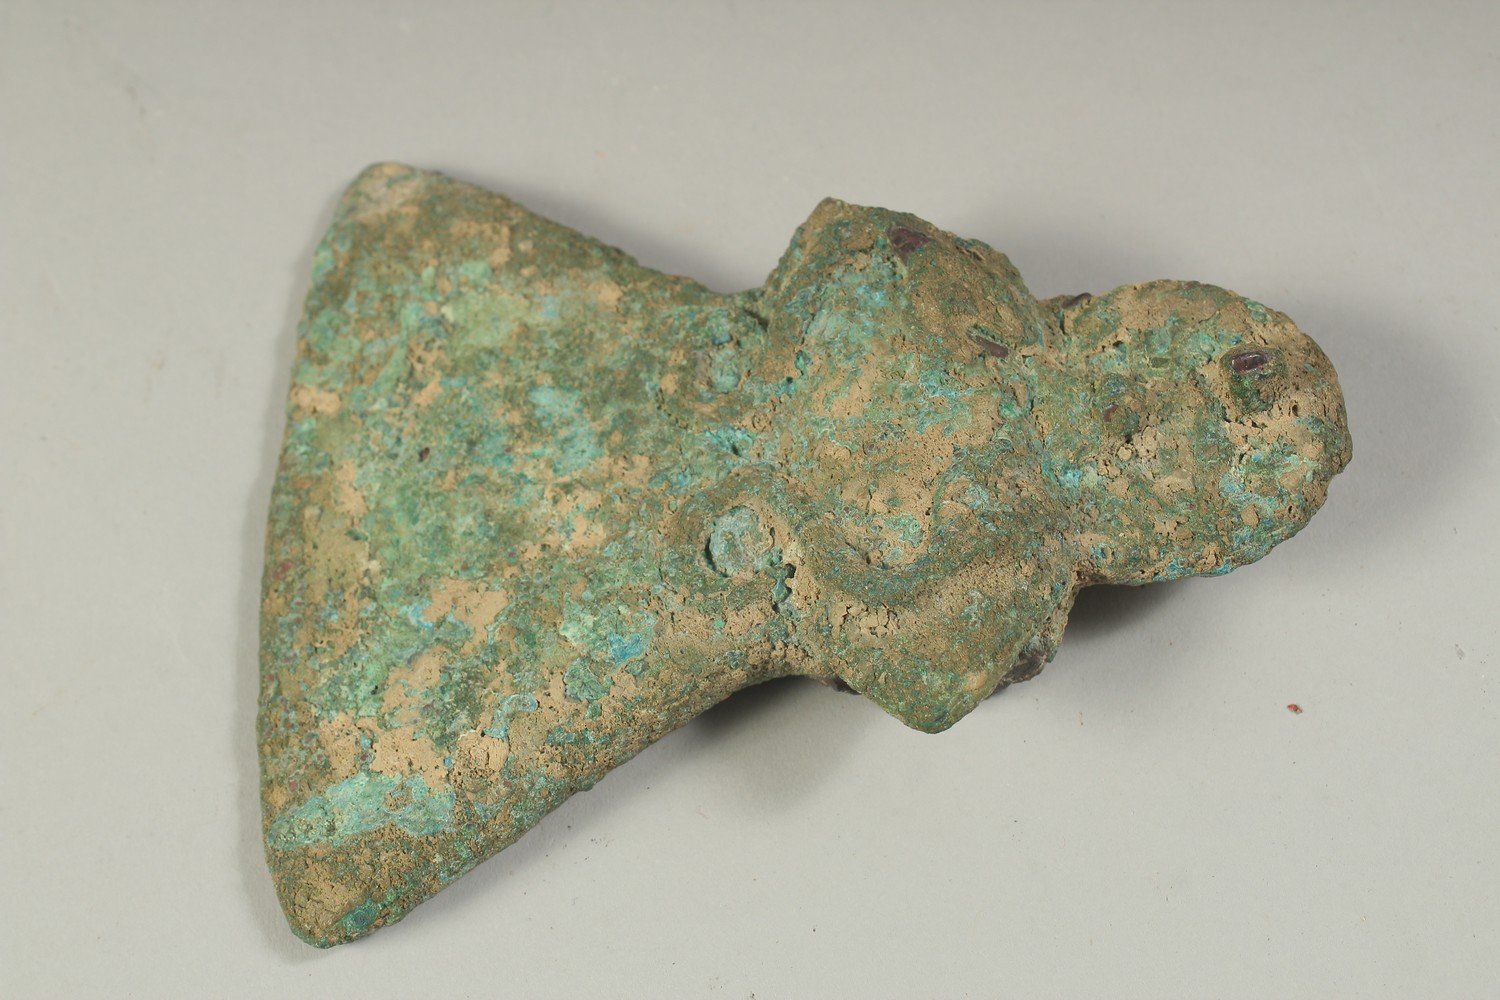 AN EARLY MIDDLE EASTERN BRONZE AMBUSH AXE, second half of the third millennium BC, with collar and - Image 2 of 2